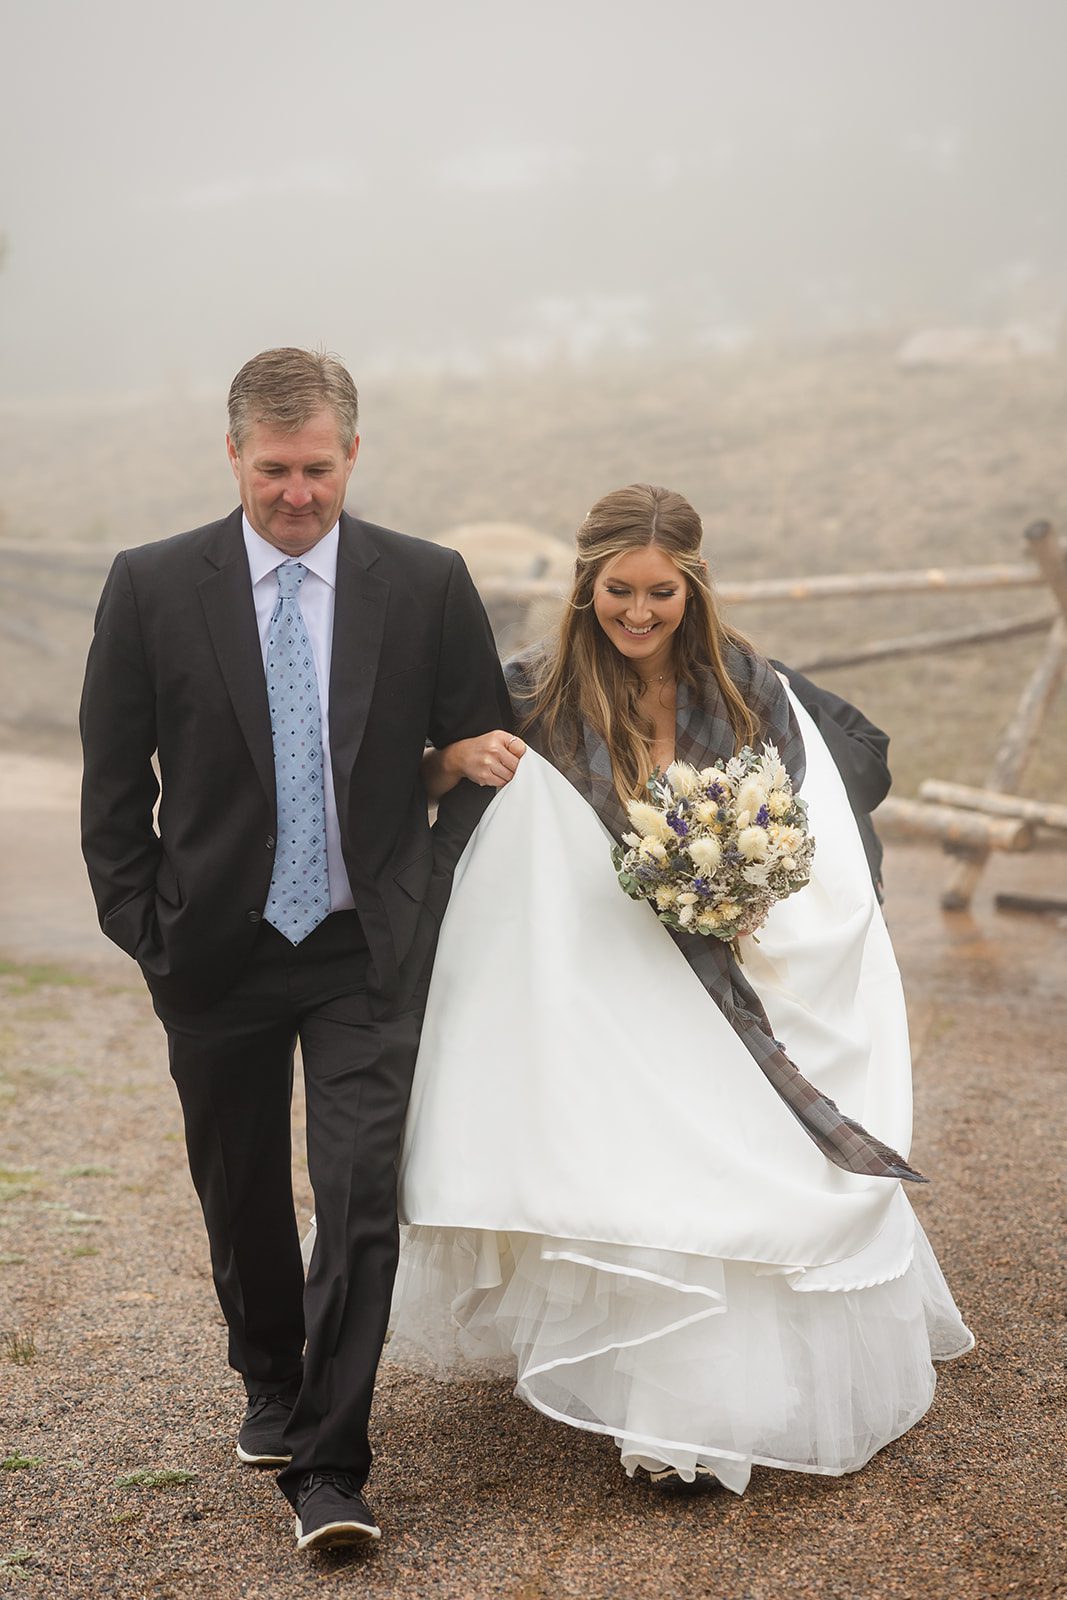 Father and bride walk down the aisle at Hidden Valley Elopement ceremony in Rocky Mountain National Park